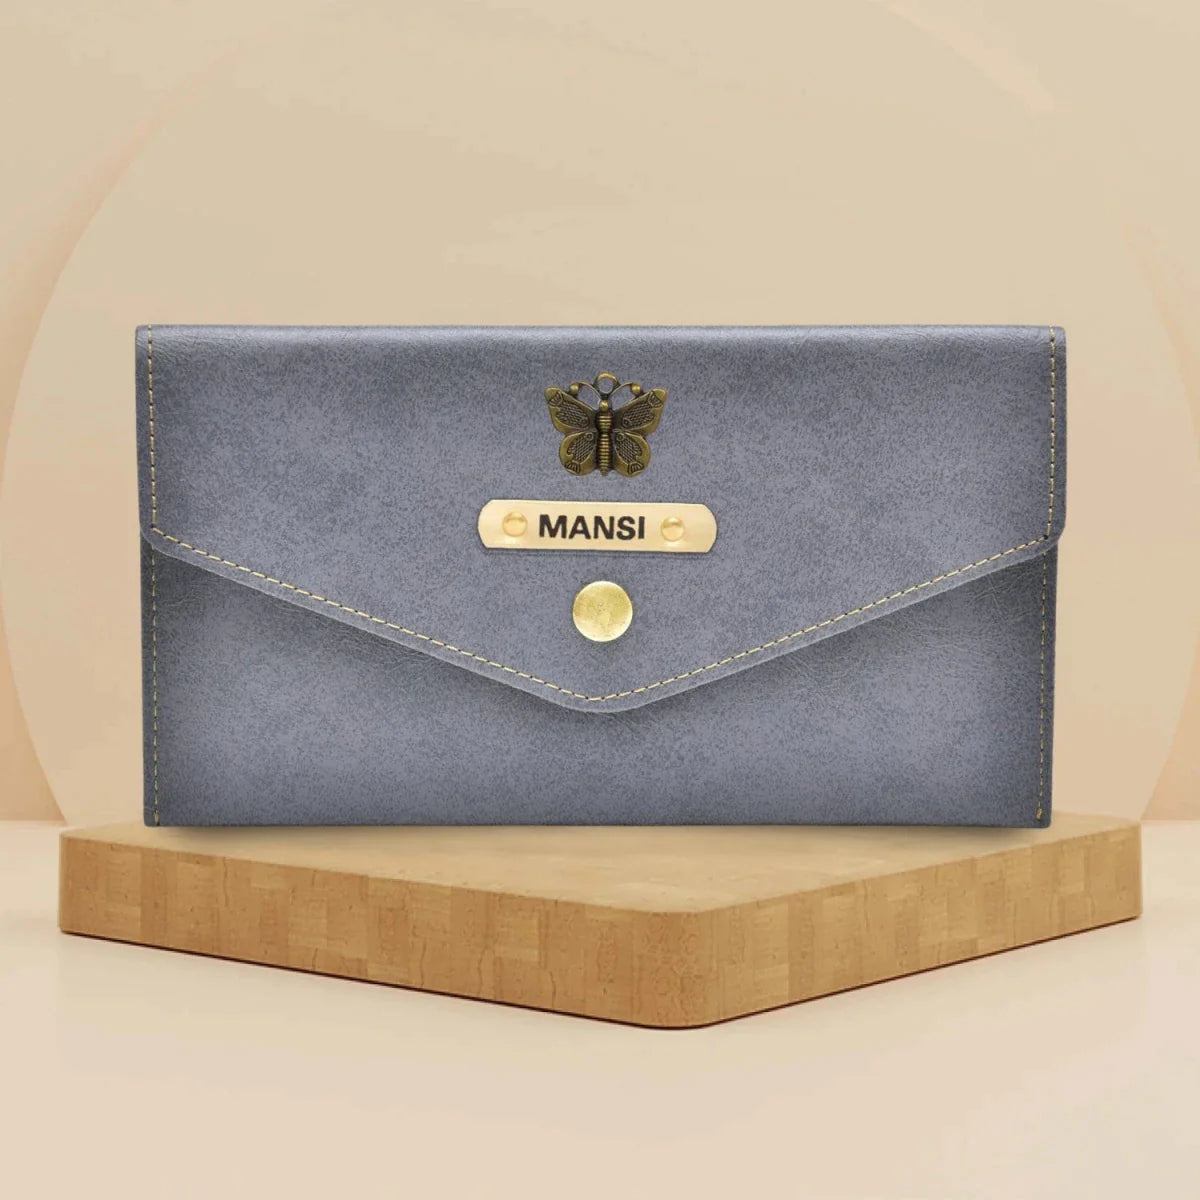 Made from premium quality leather, these clutches are built to last and will age beautifully over time, developing a unique patina that will set them apart.